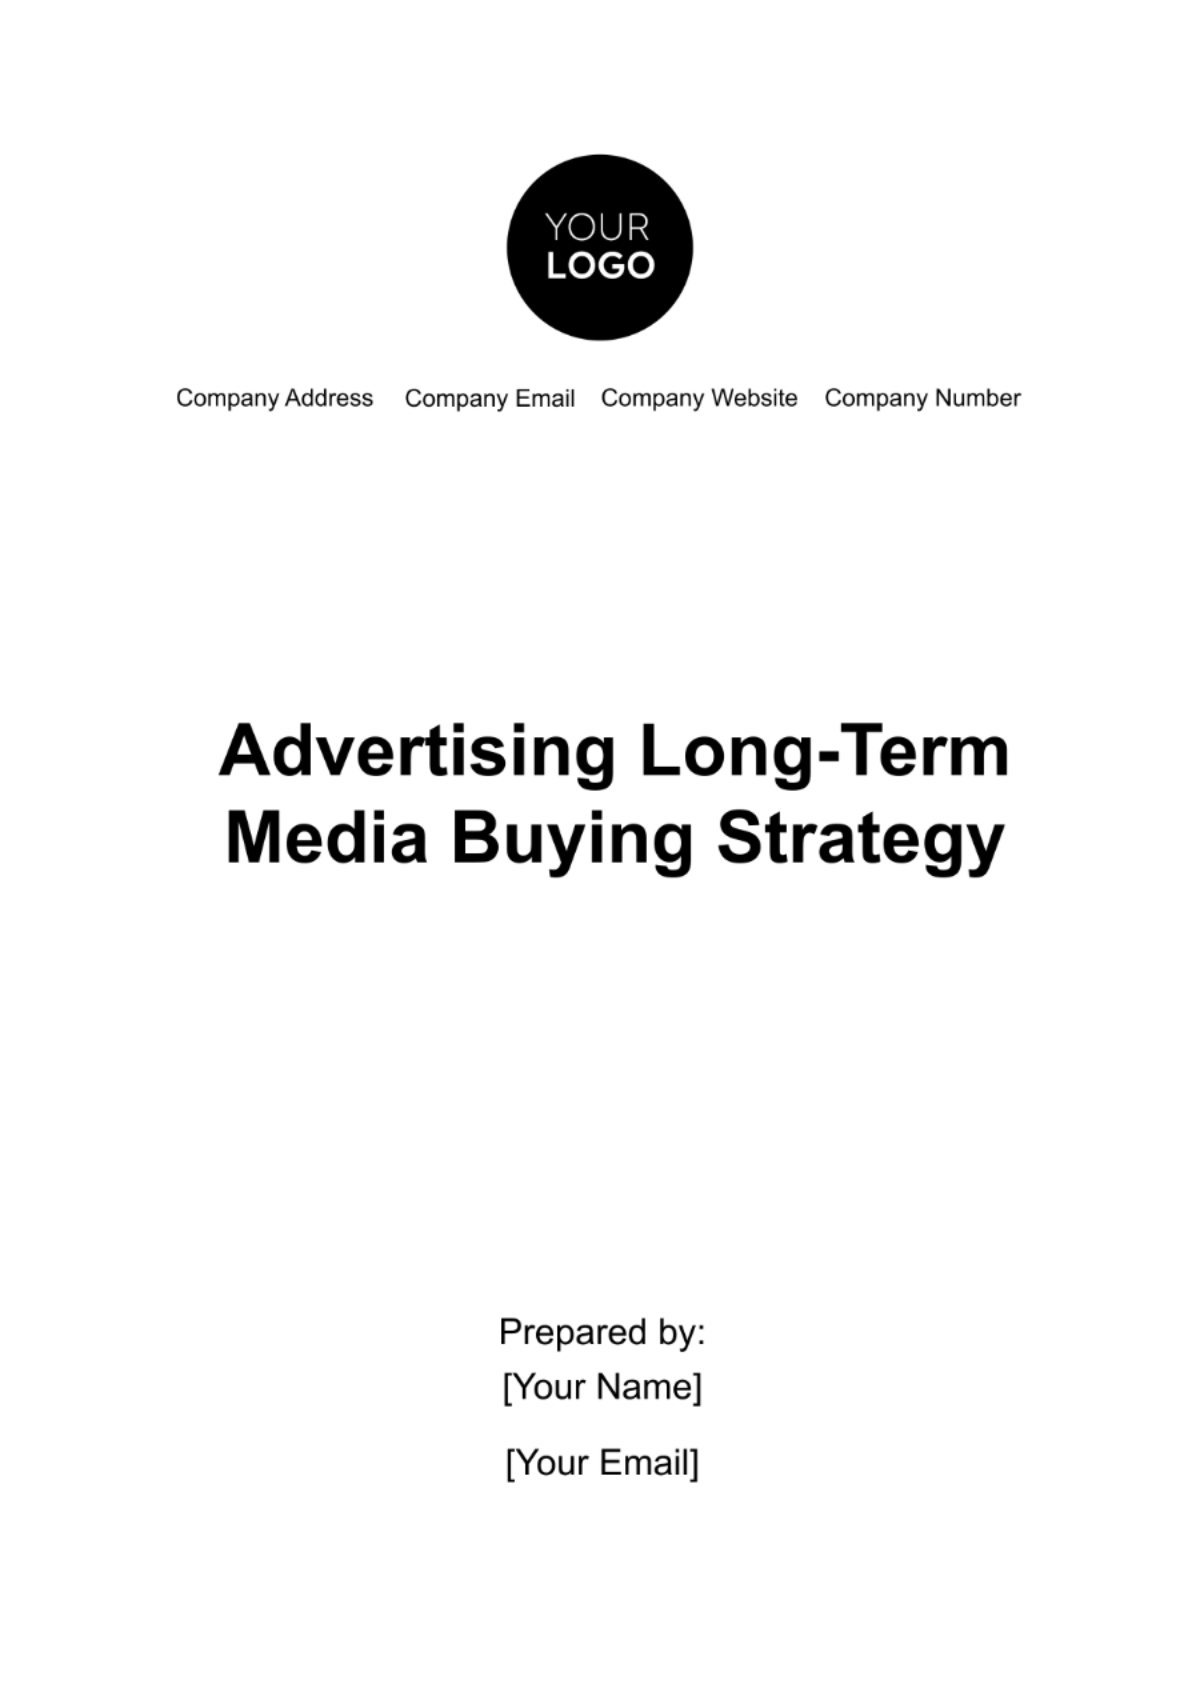 Advertising Long-Term Media Buying Strategy Template